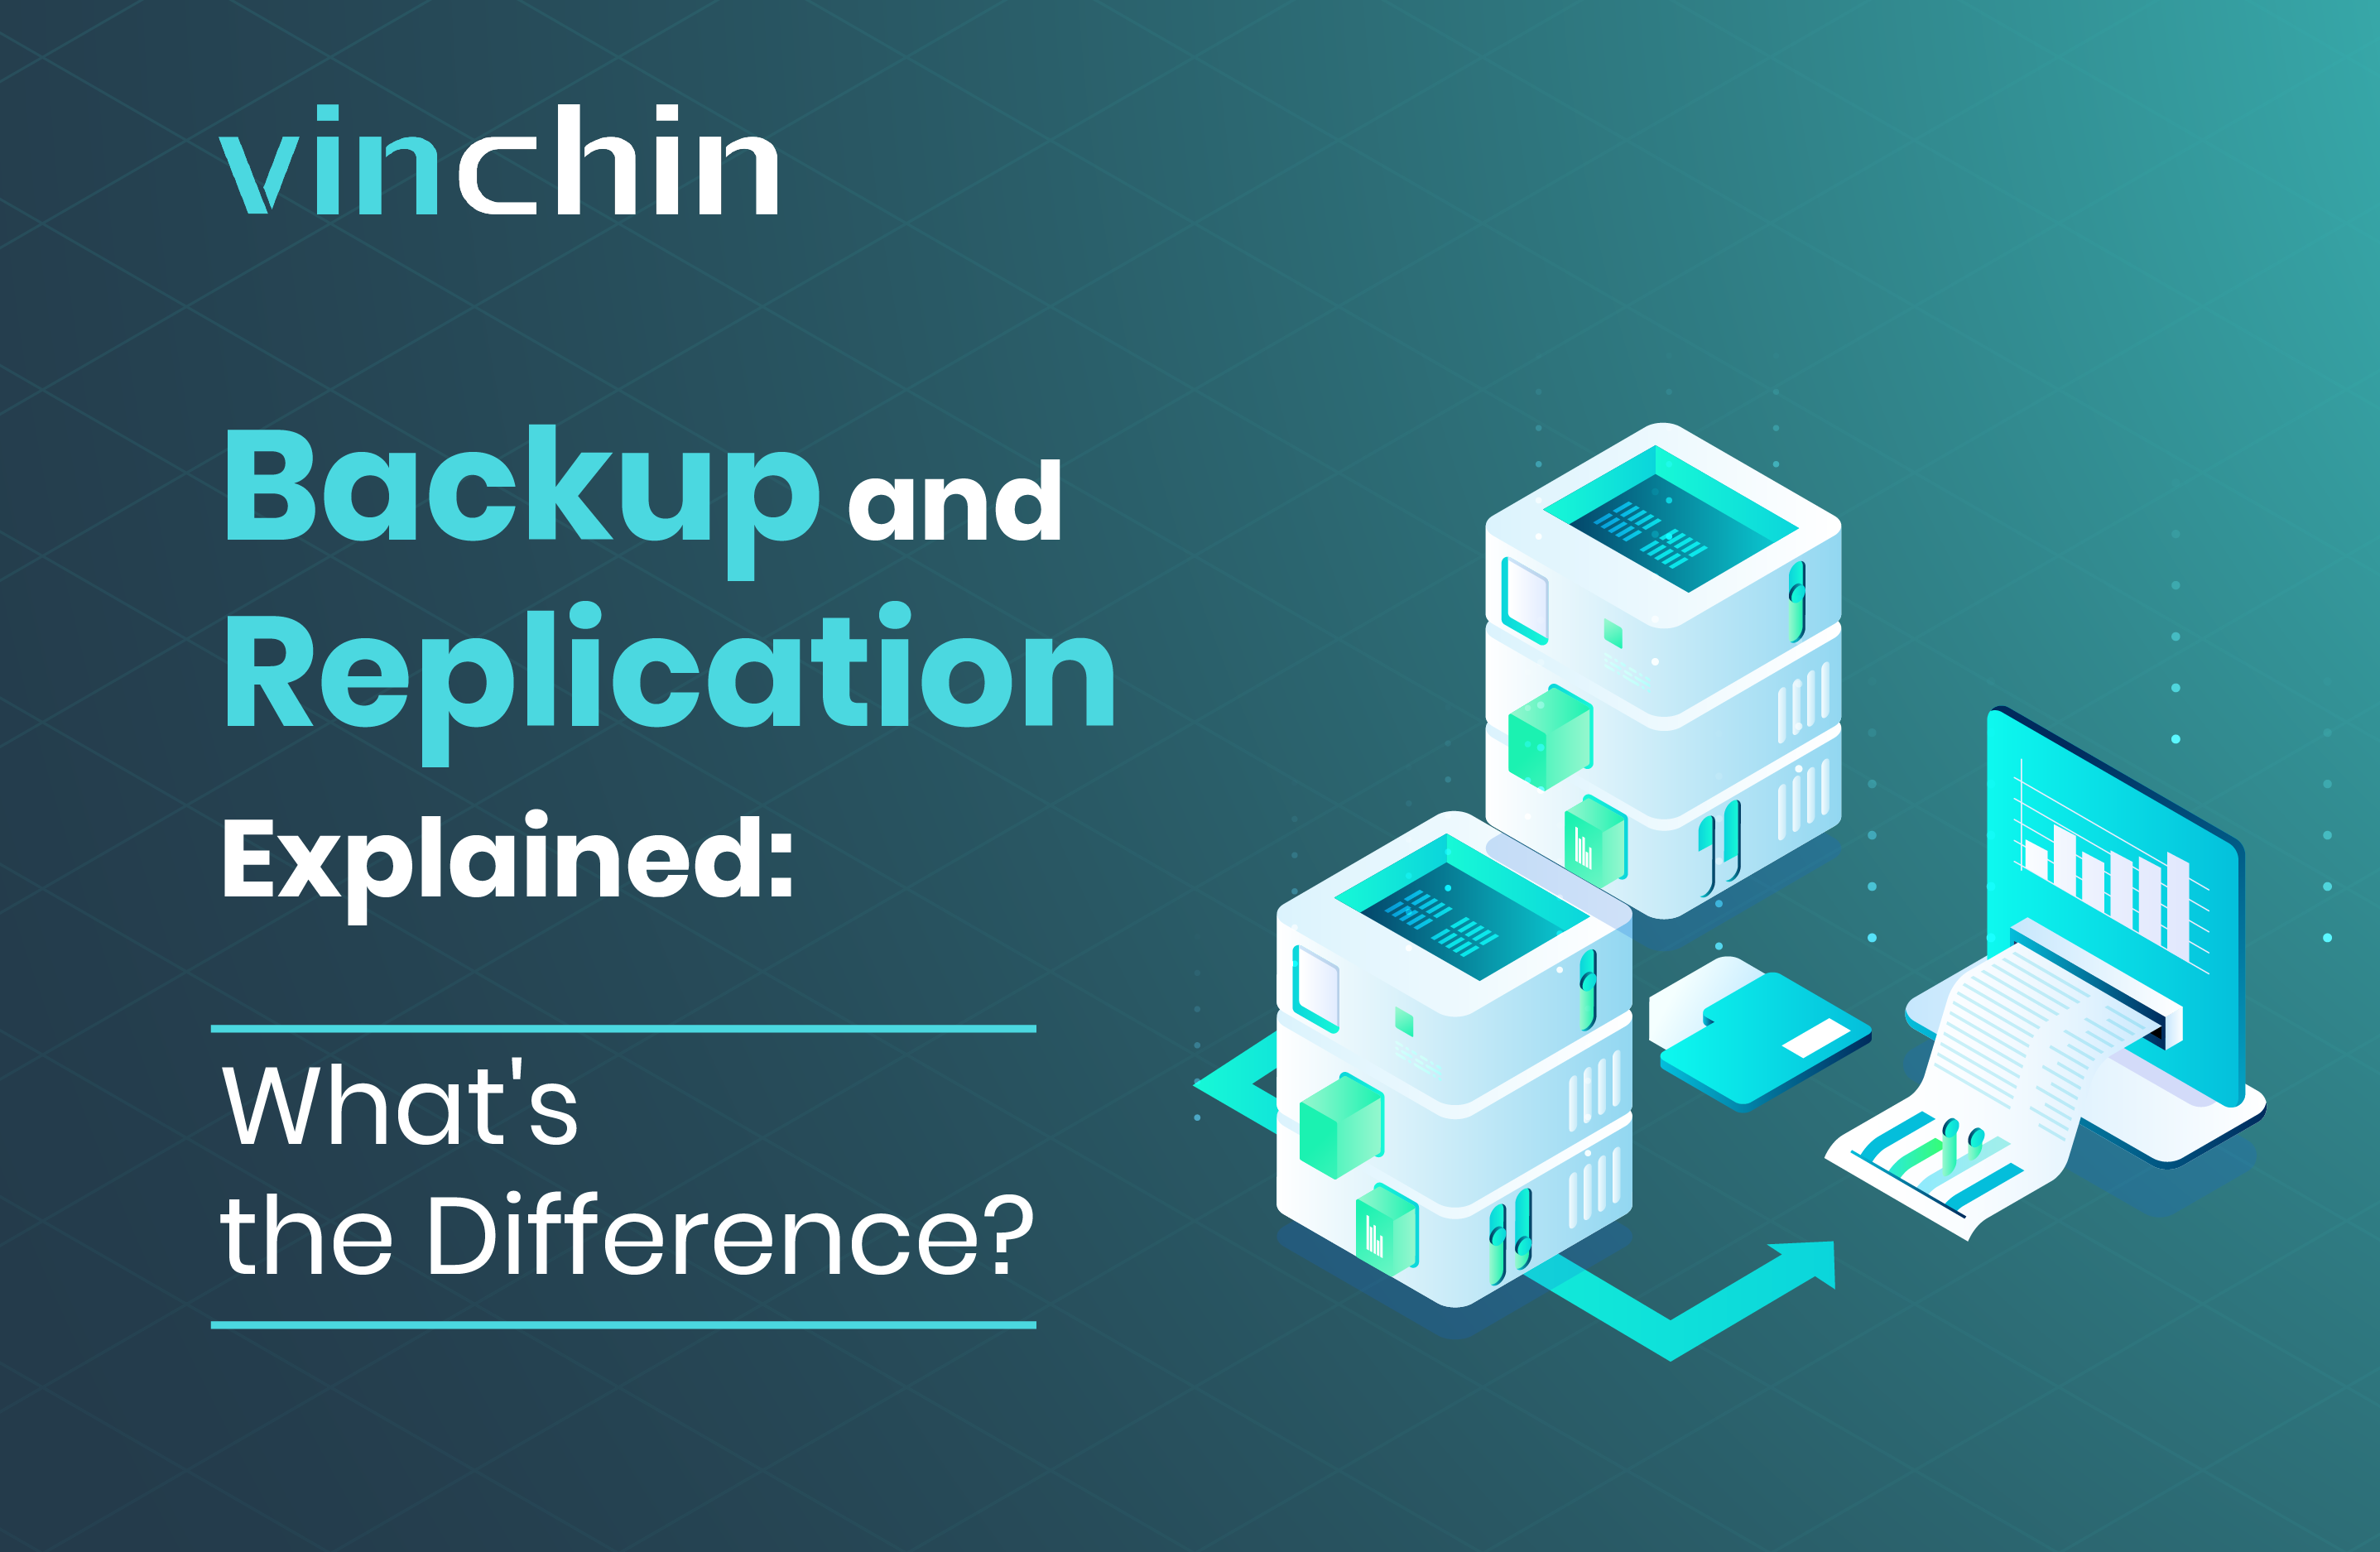 Backup and Replication Explained: What’s the Difference?